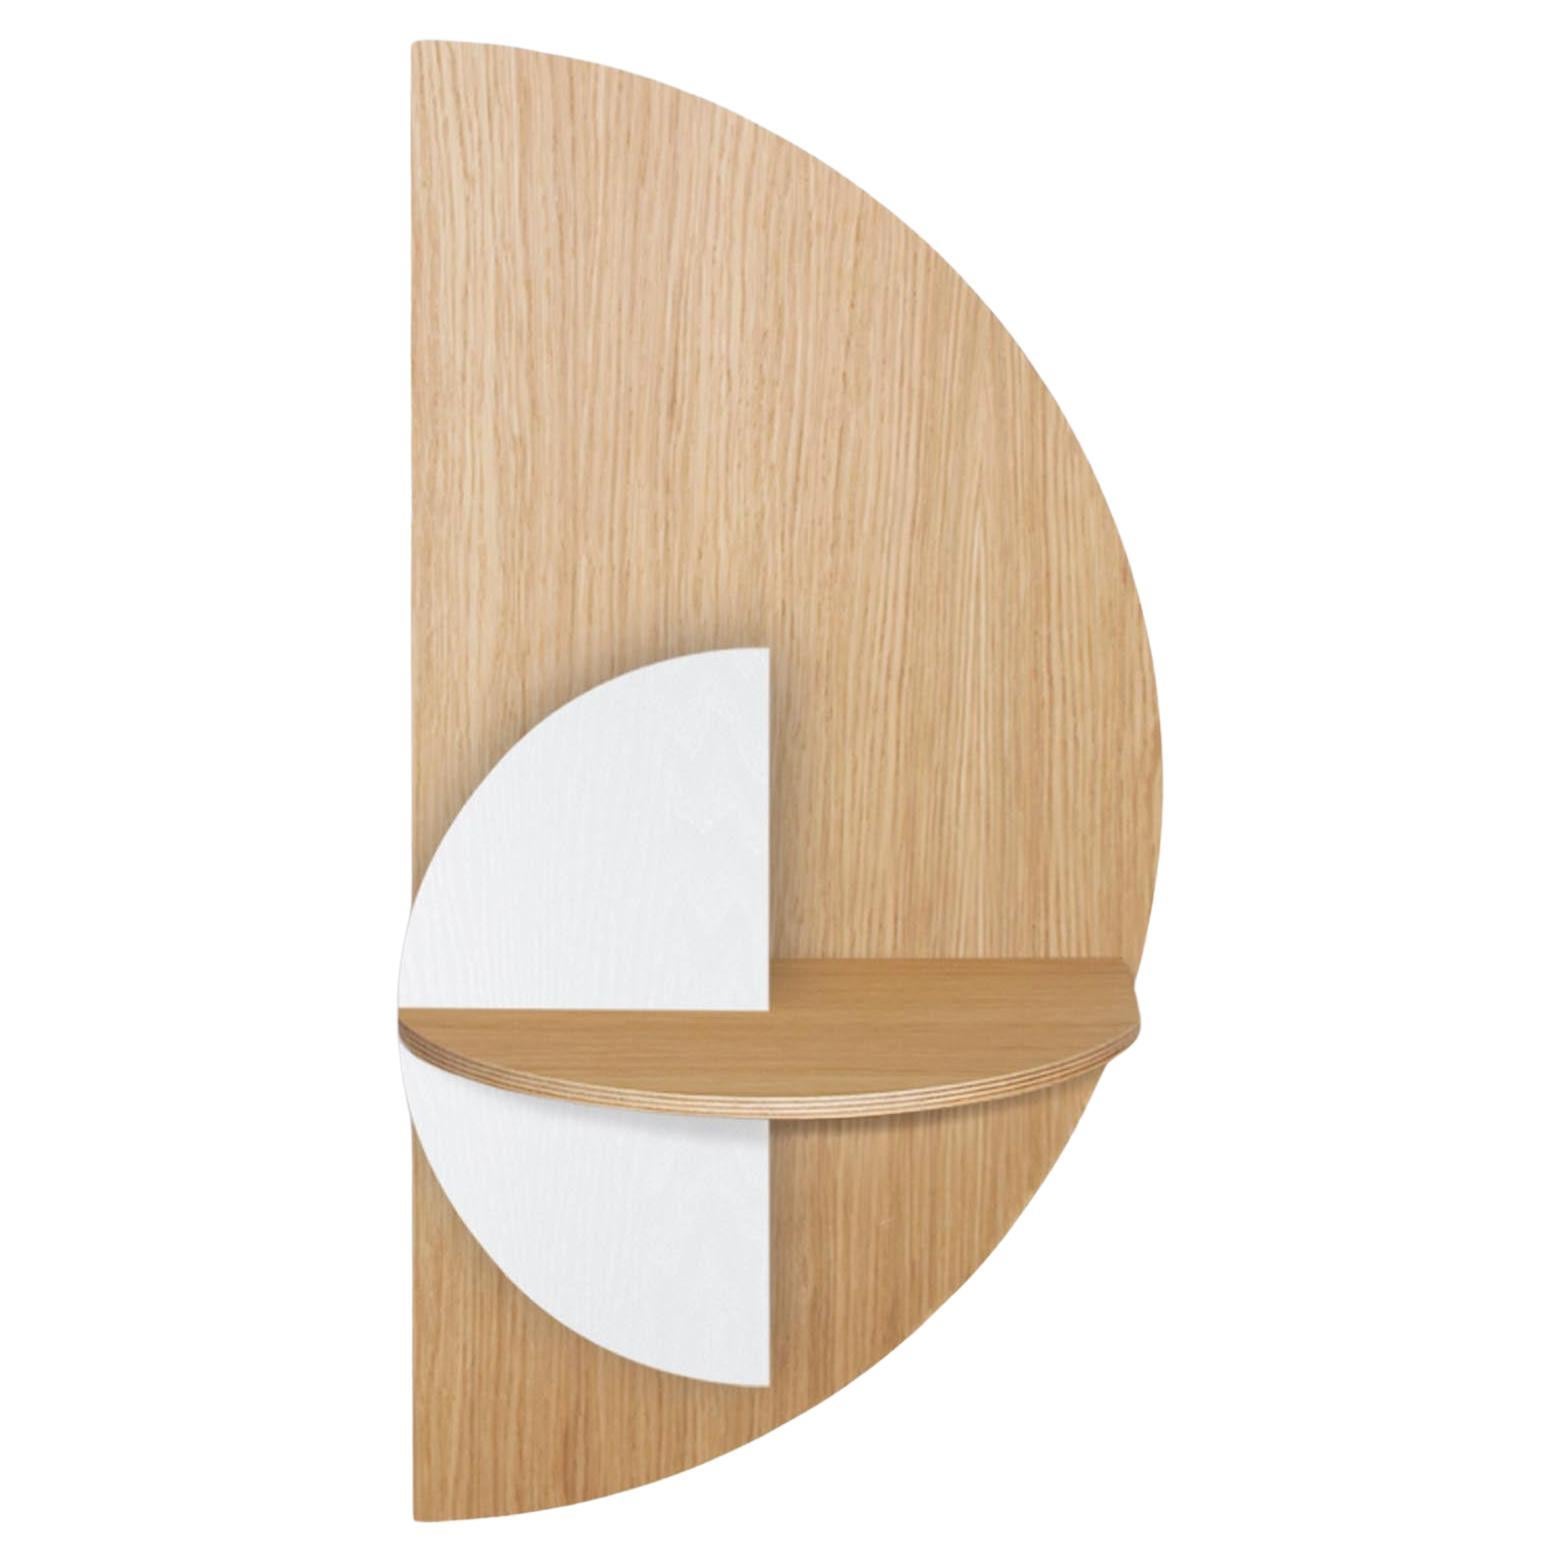 Alba L Slim Bedside Table Semicircle Oak and White For Sale